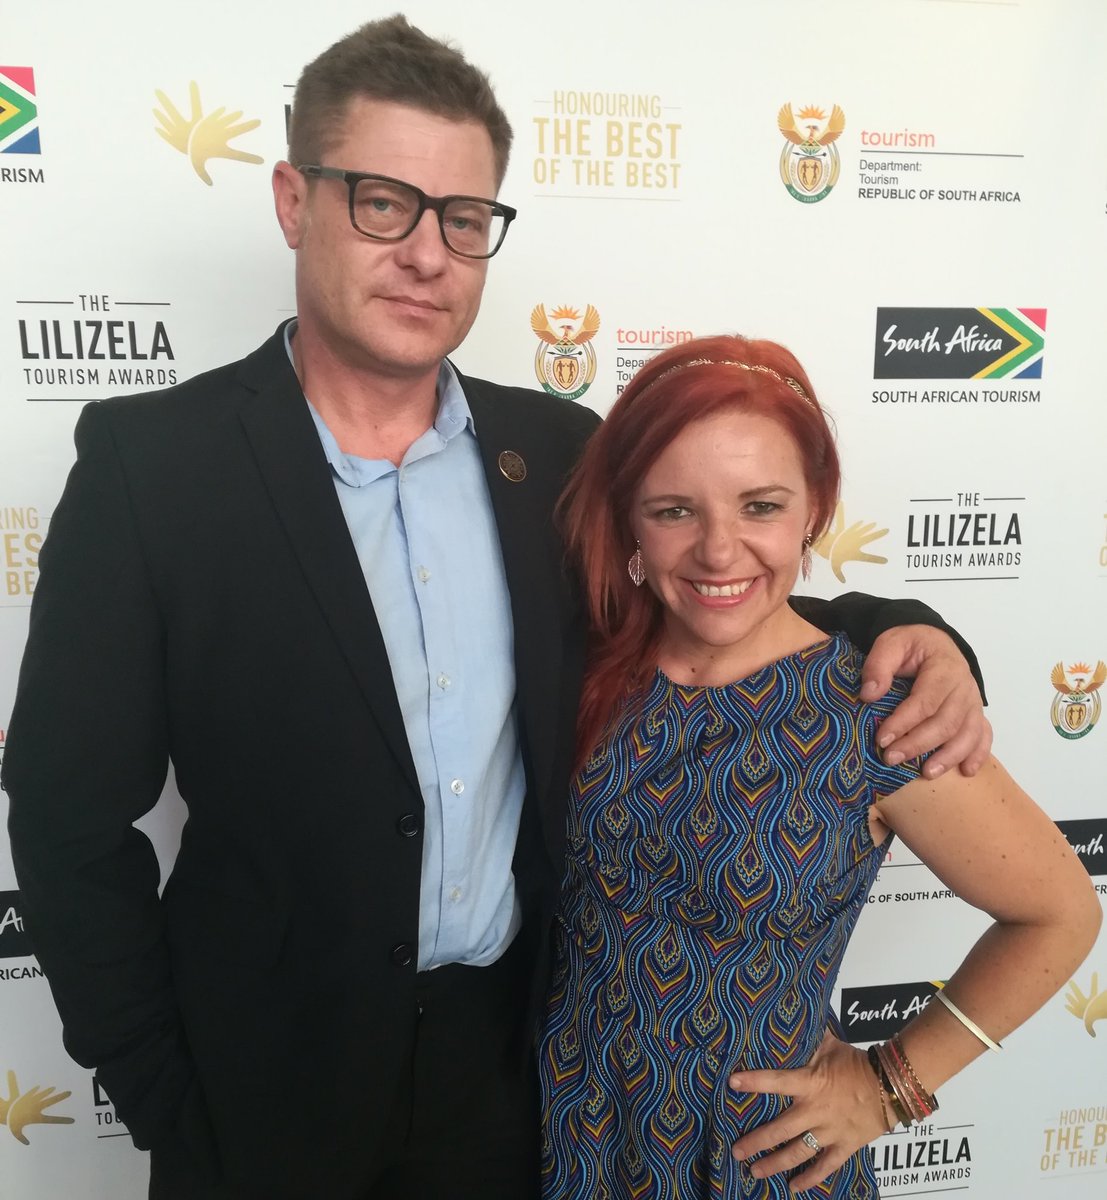 Celebrating the best of the best this evening. #tourism #LilizelaAwards18 #SouthAfricanTourism #checkinbreatheout